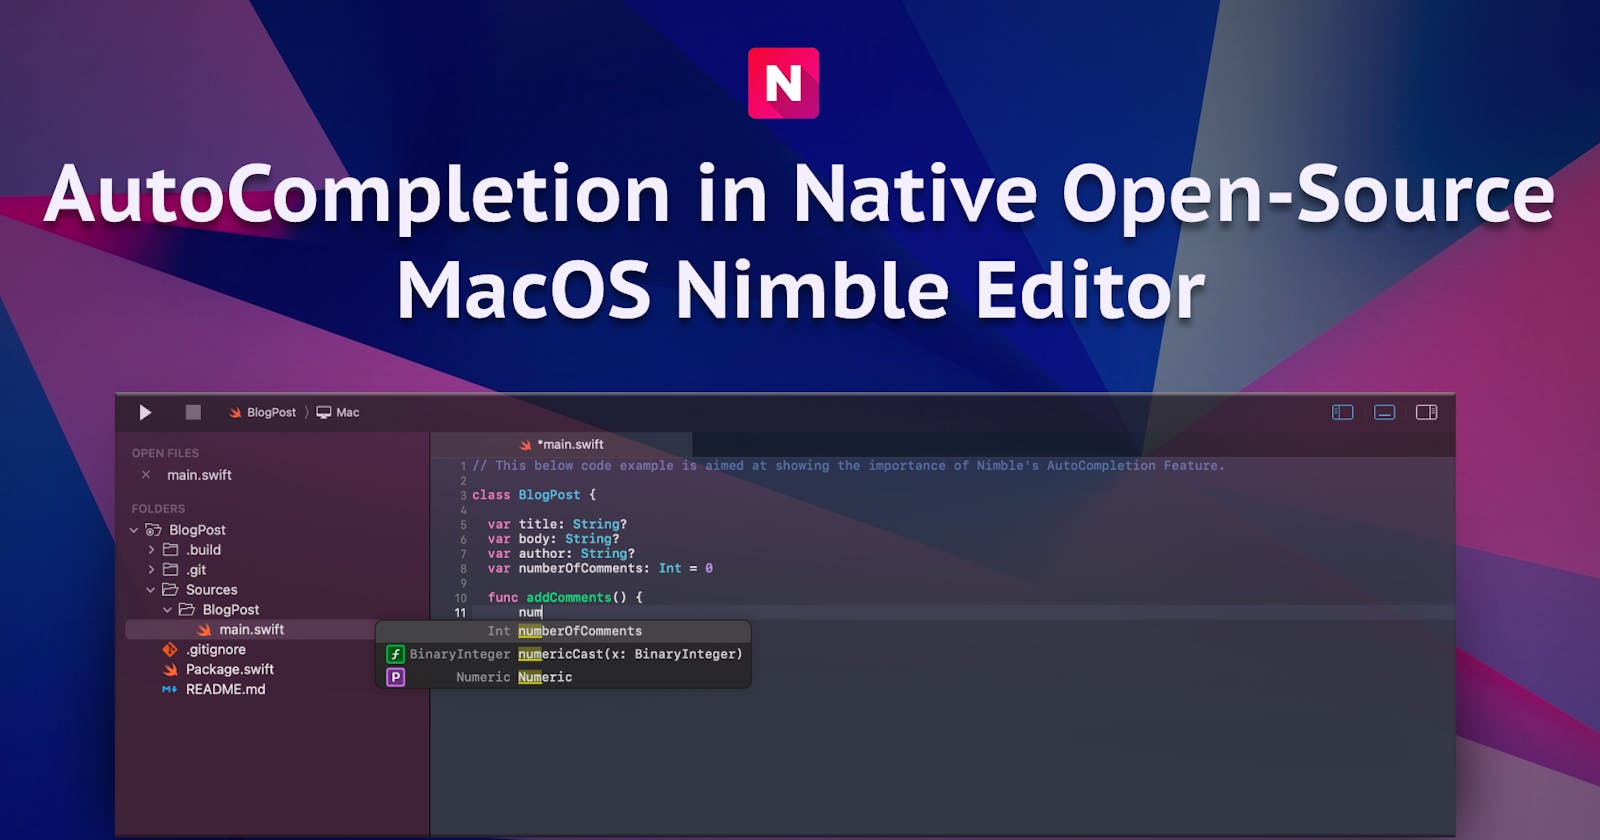 AutoCompletion in Native Open-Source MacOS Nimble Editor